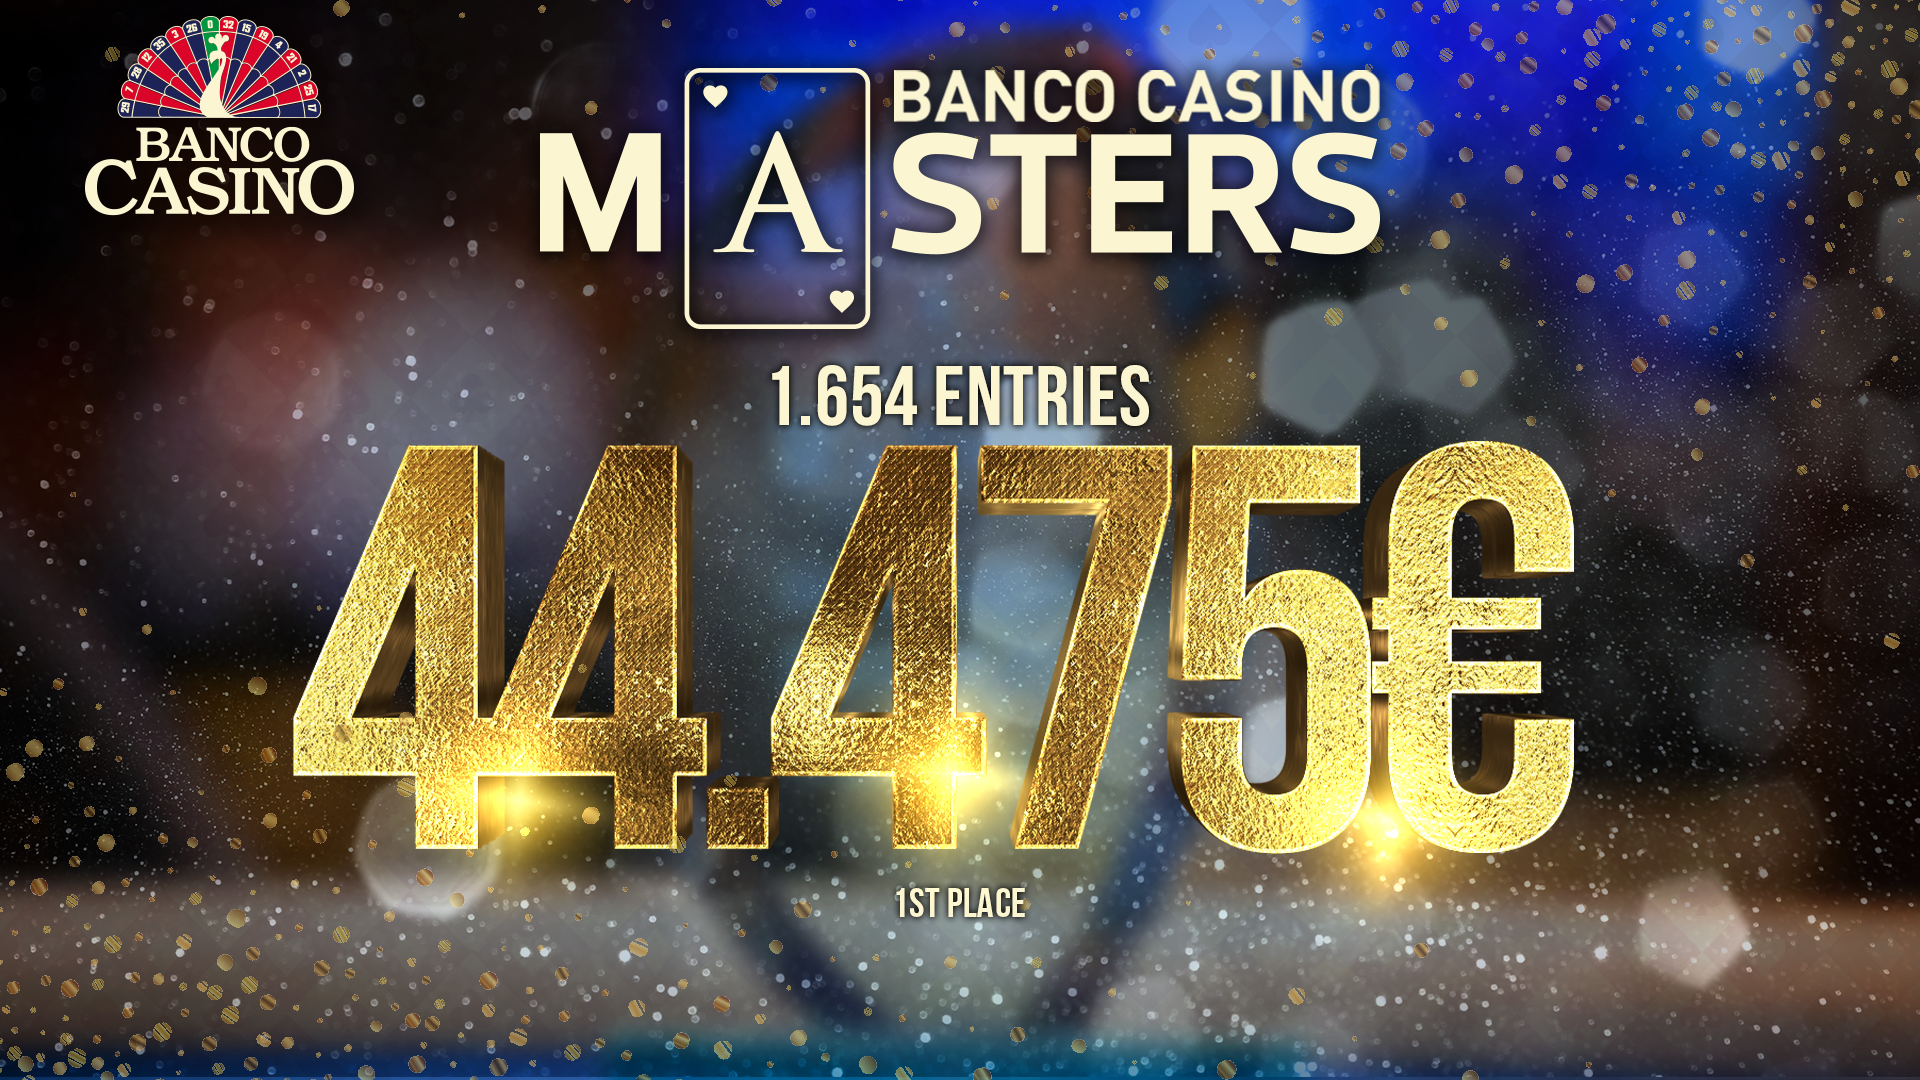 BANCO CASINO MASTERS #33 WITH 1,654 ENTRIES IS LOOKING FOR A CHAMPION THAT WILL TAKE HOME 44,475€!